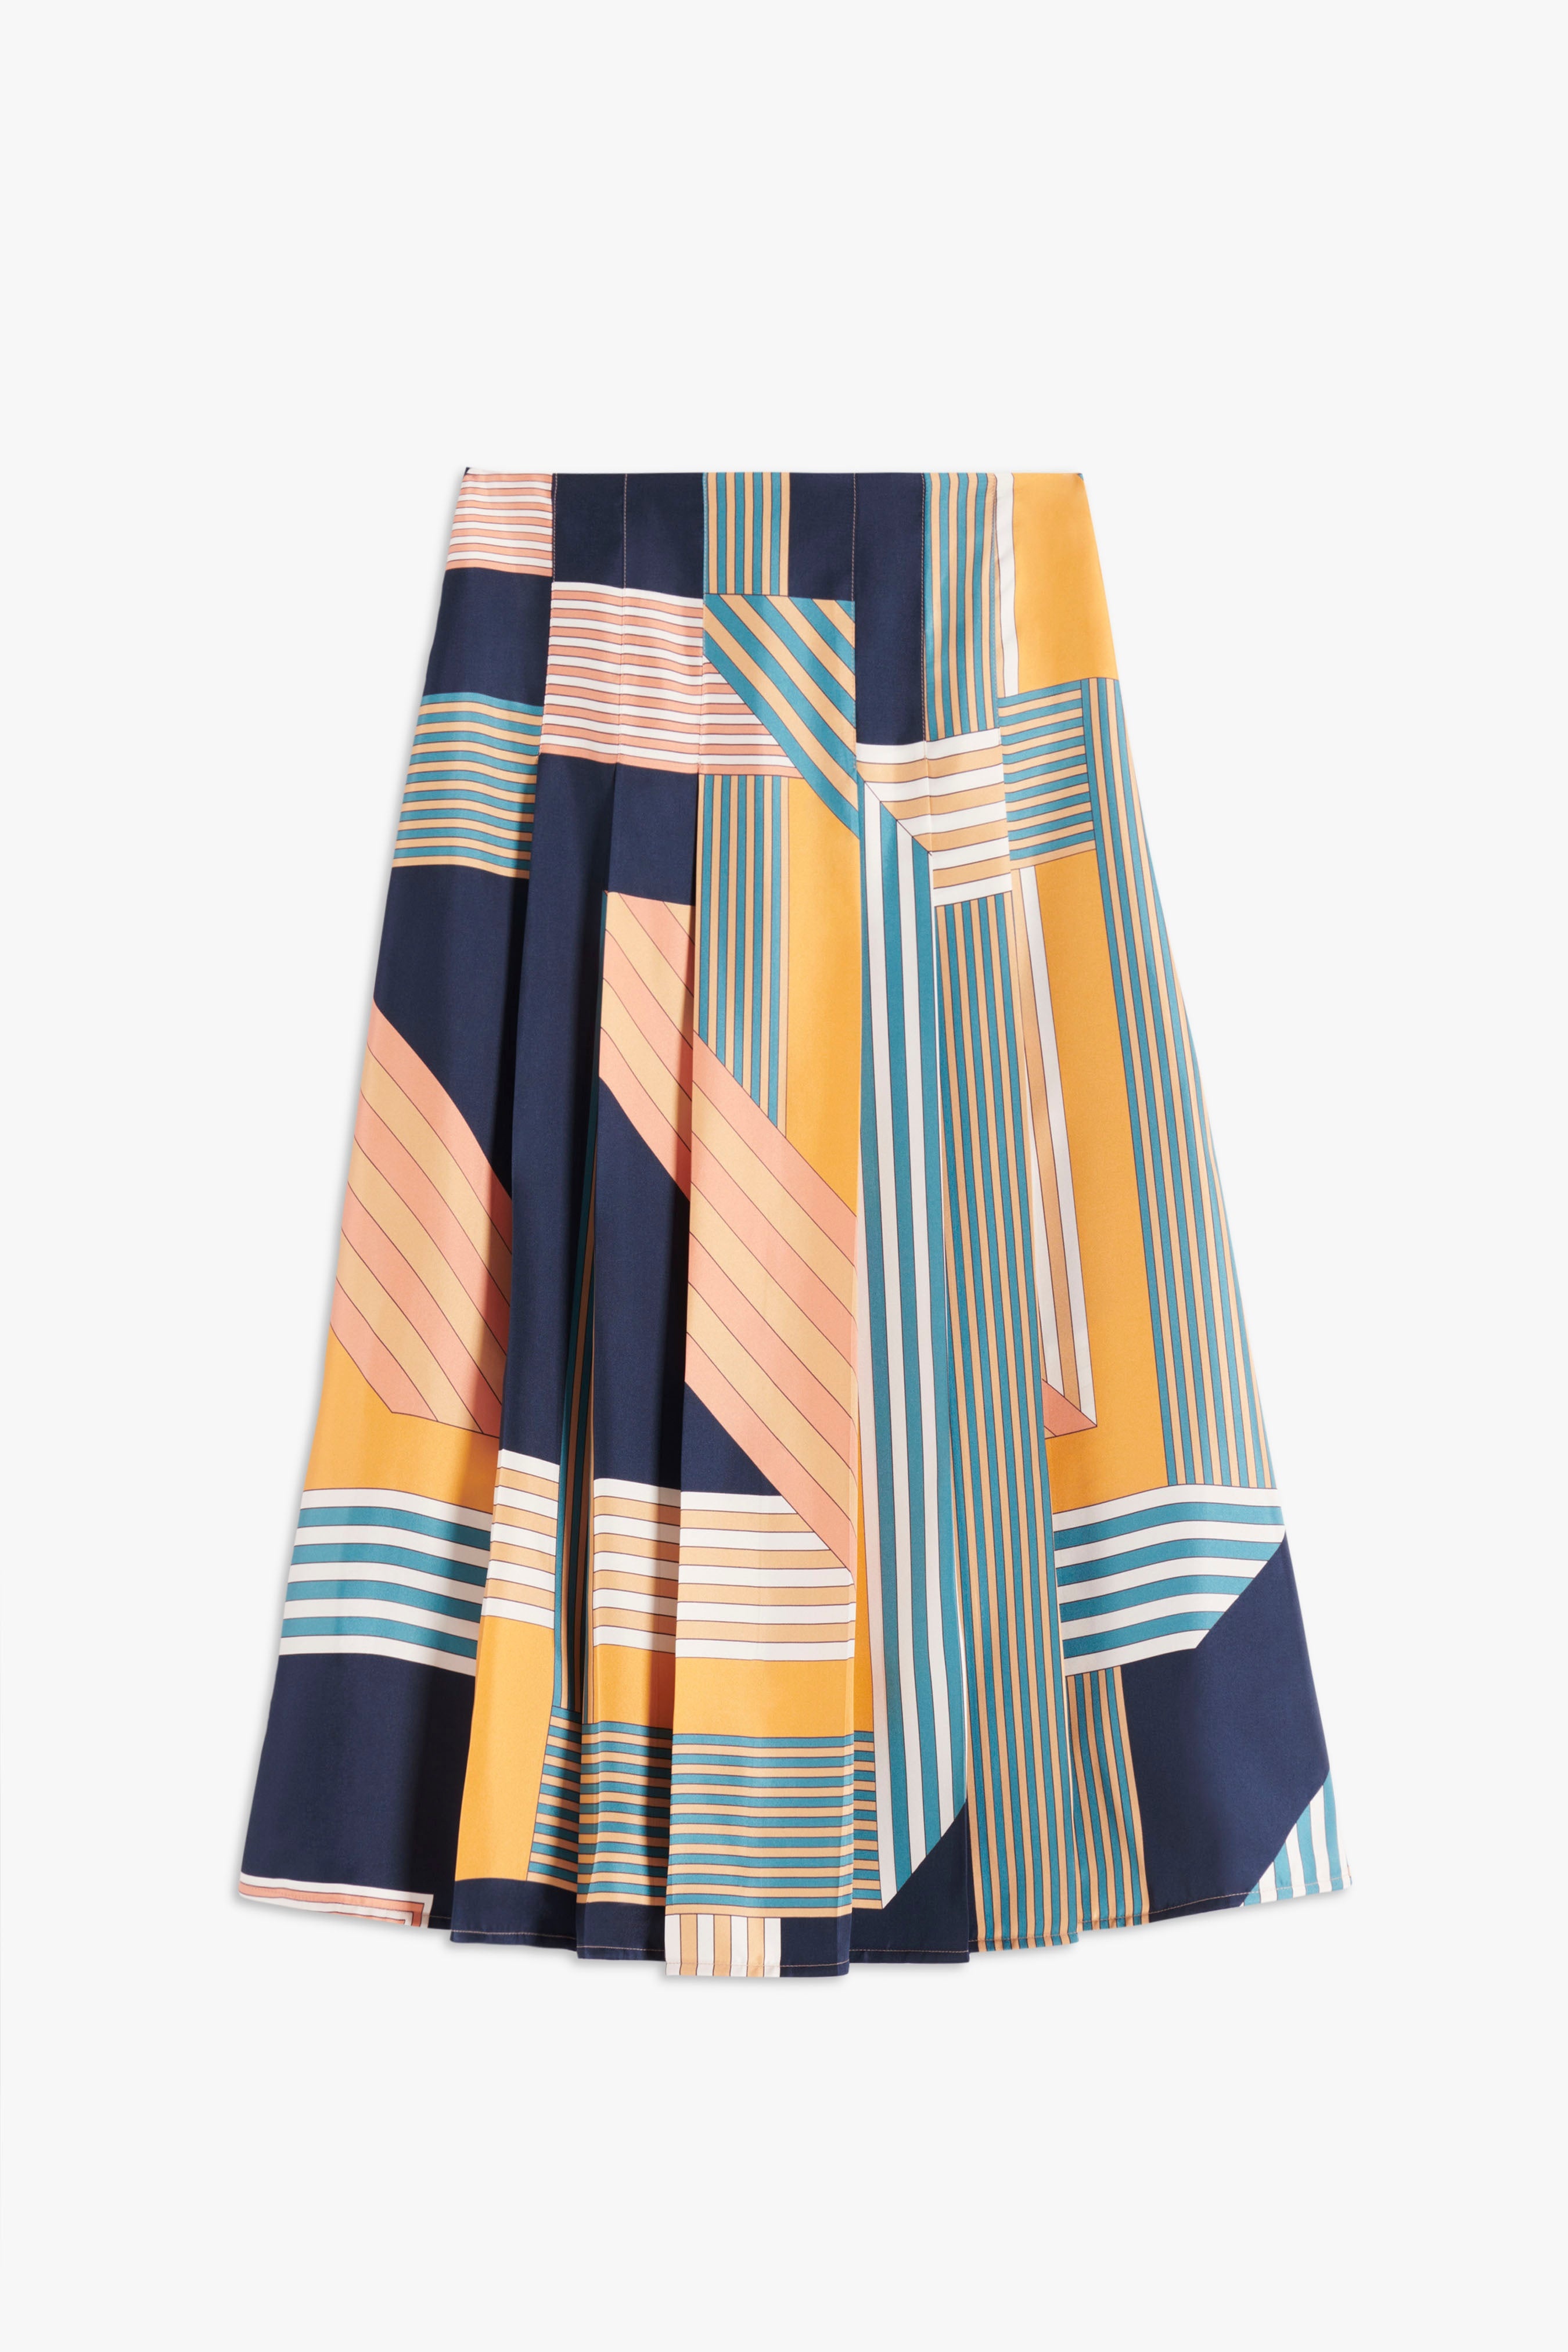 Patch Pocket Pleated Skirt in Navy-Multi - 1